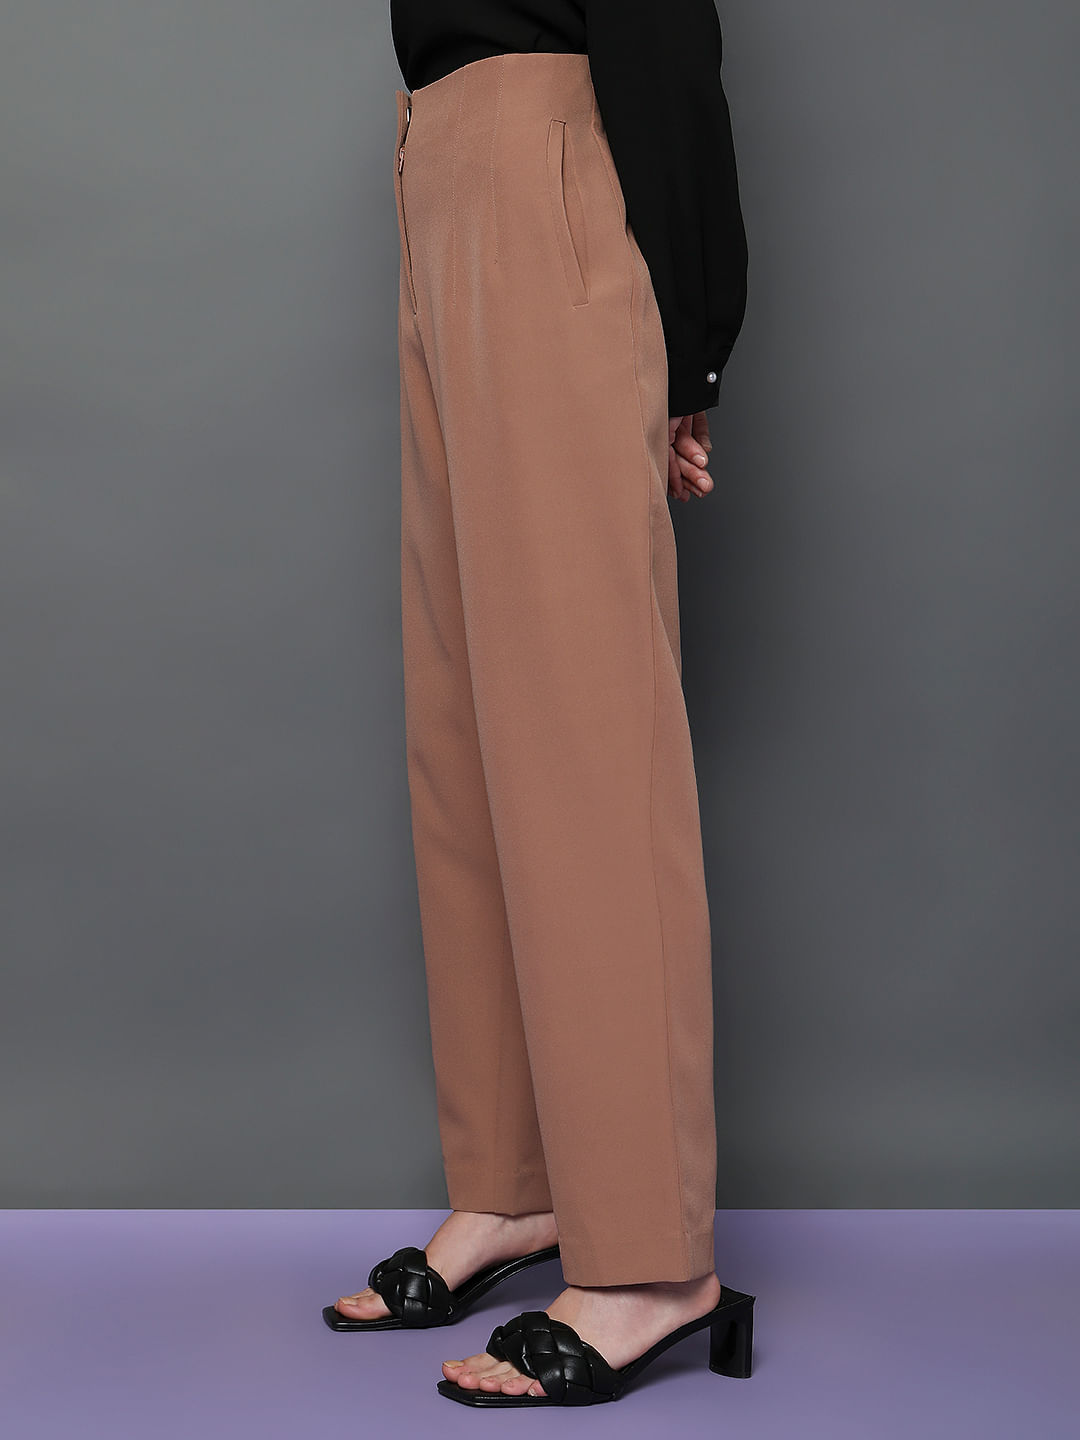 simplicity straight leg pants for womwn